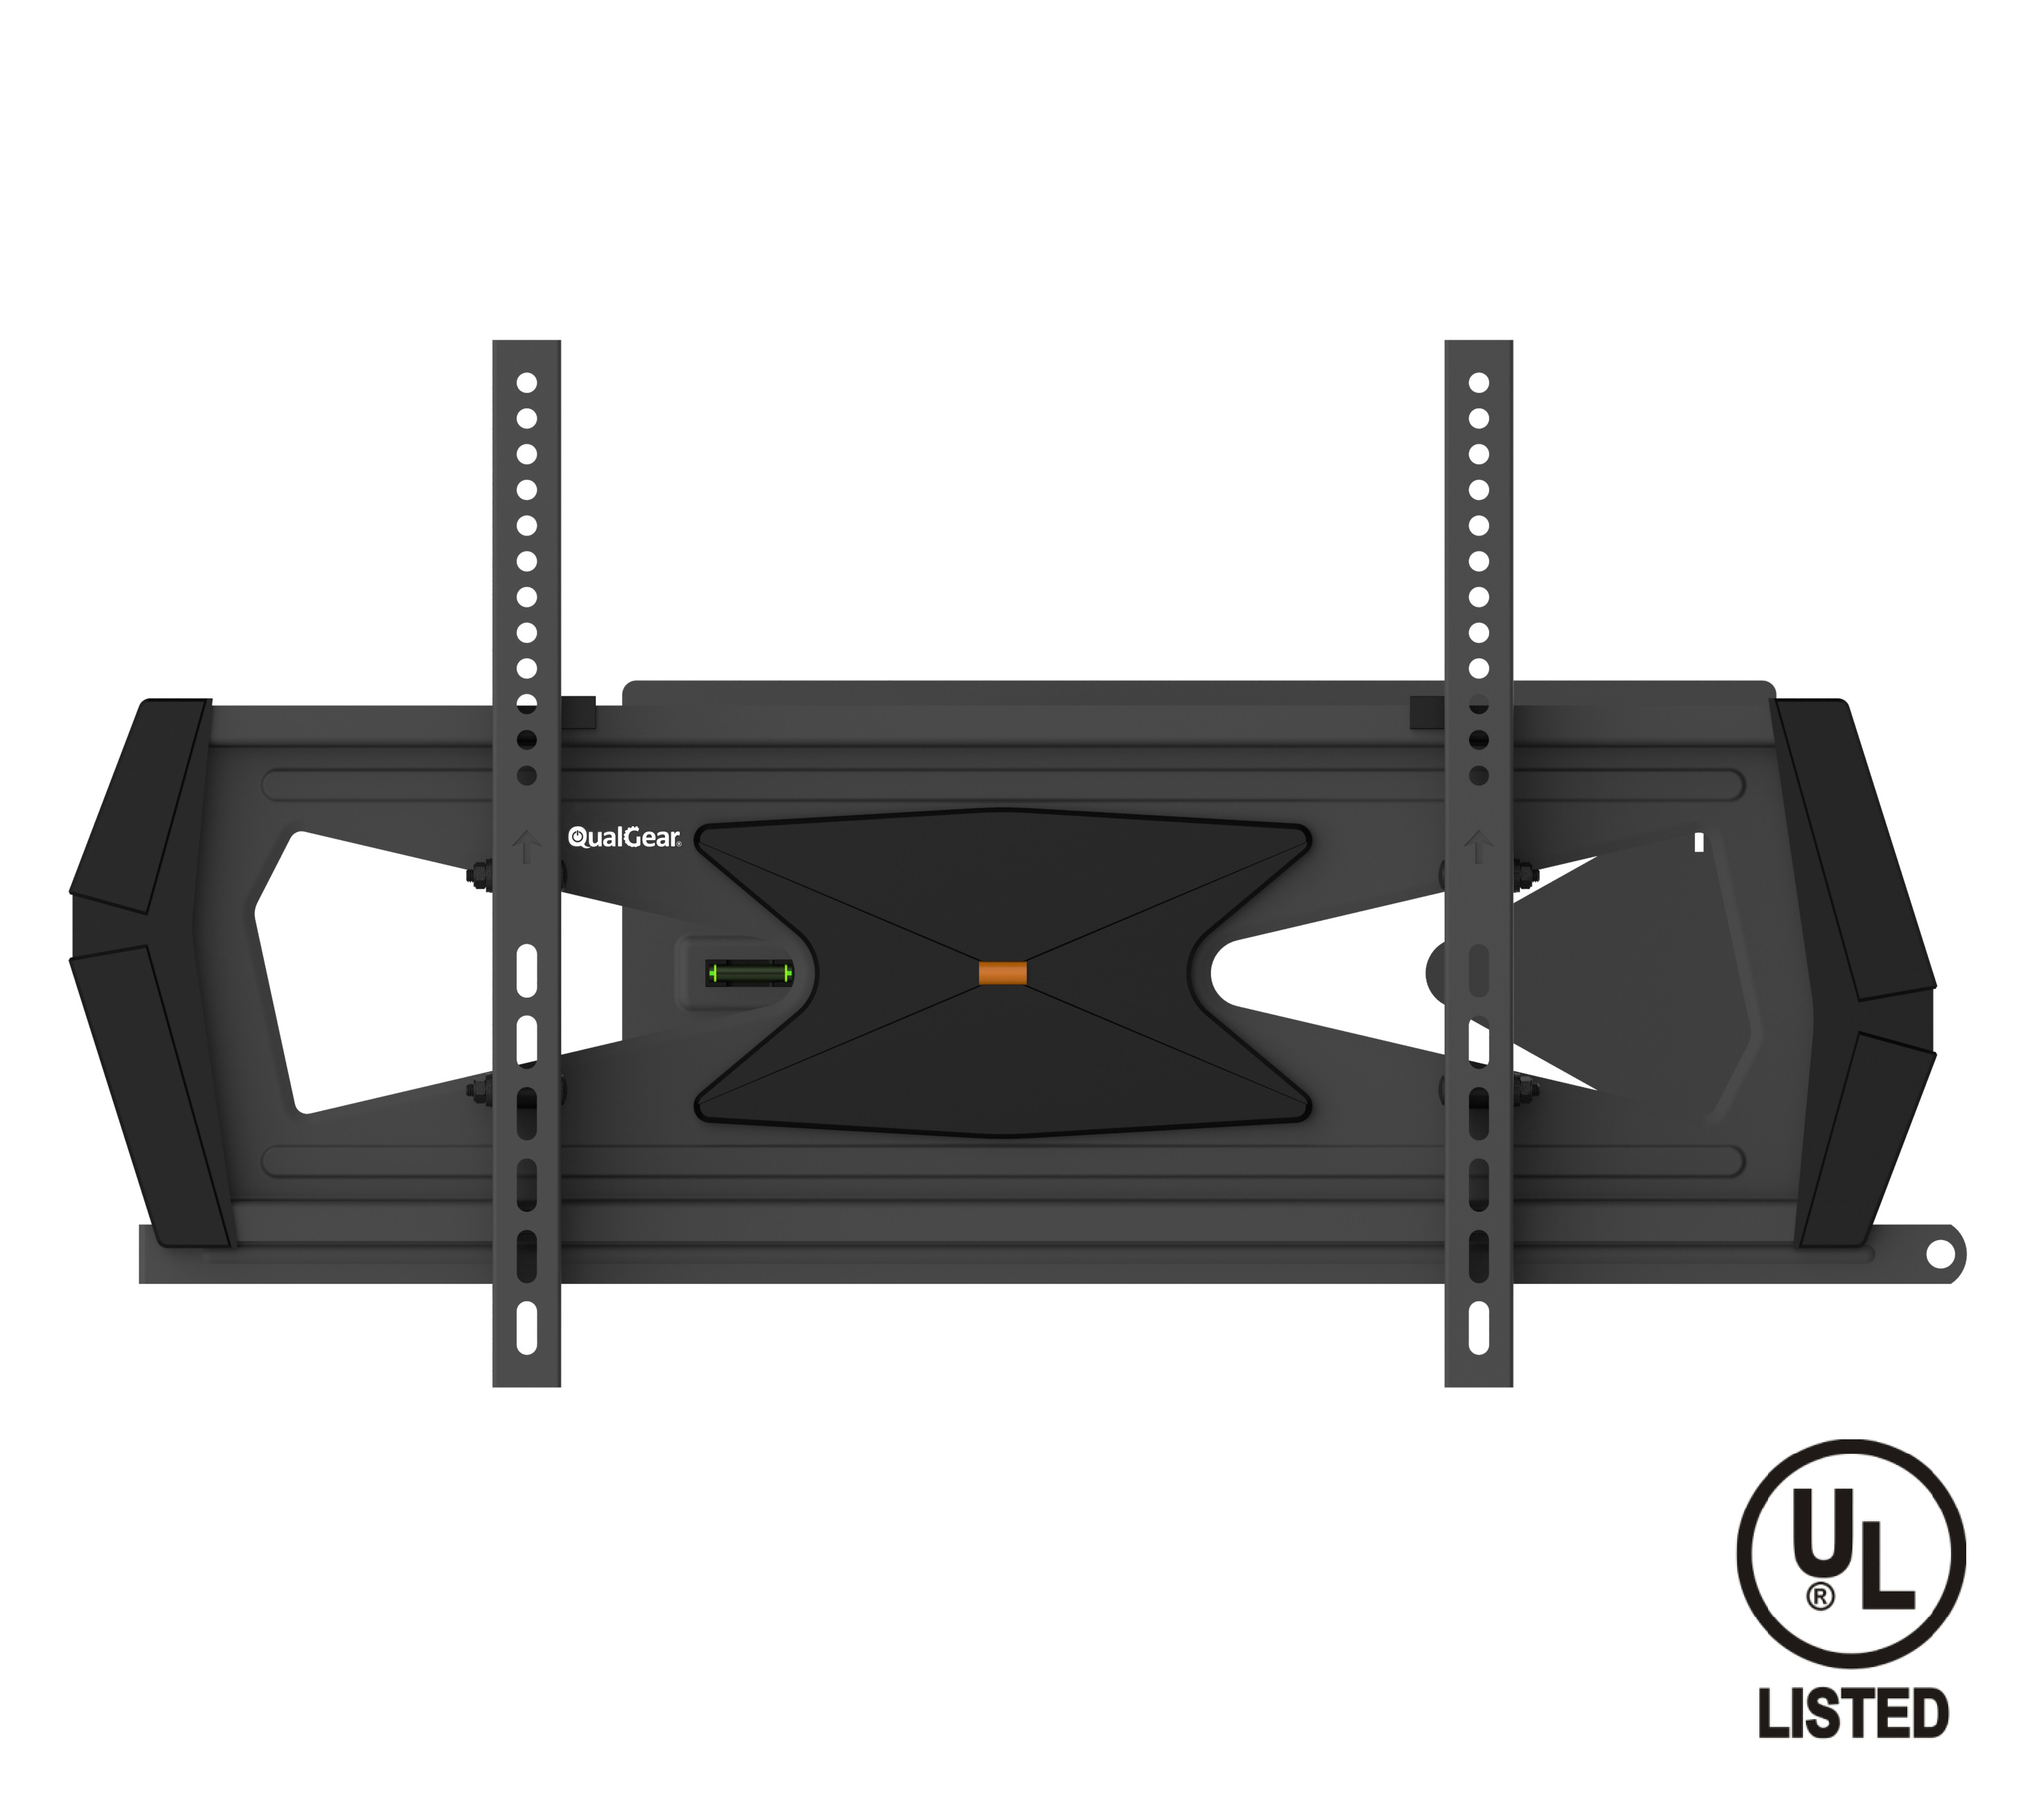 QualGear Heavy Duty Full Motion TV Mount For 37-70 Inch Flat Panel and Curved TVs, Black (QG-TM-032-BLK) [UL Listed]